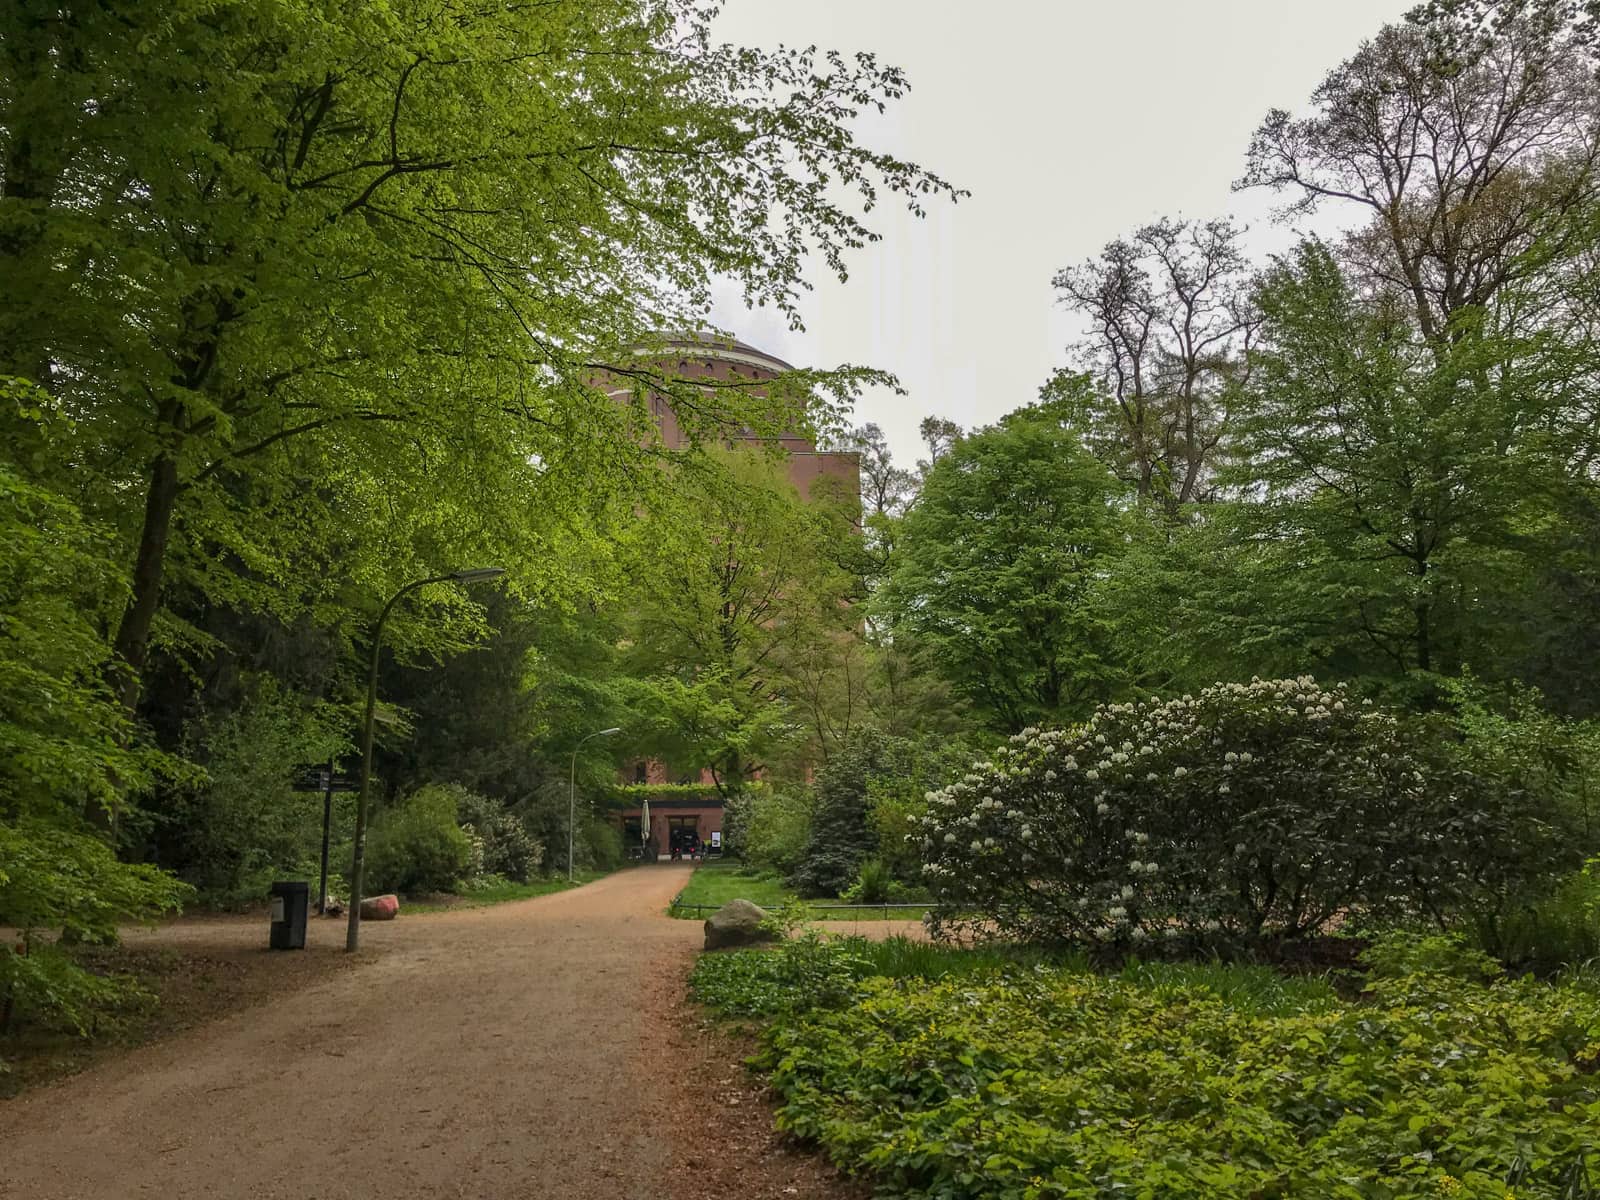 The inside of a large garden. In the background is a large brown building, partially covered by trees in front of it. The trees have many leaves but their branches are still visible. A dirt path leads in the direction of the building. To the right of frame are some planted shrubs.